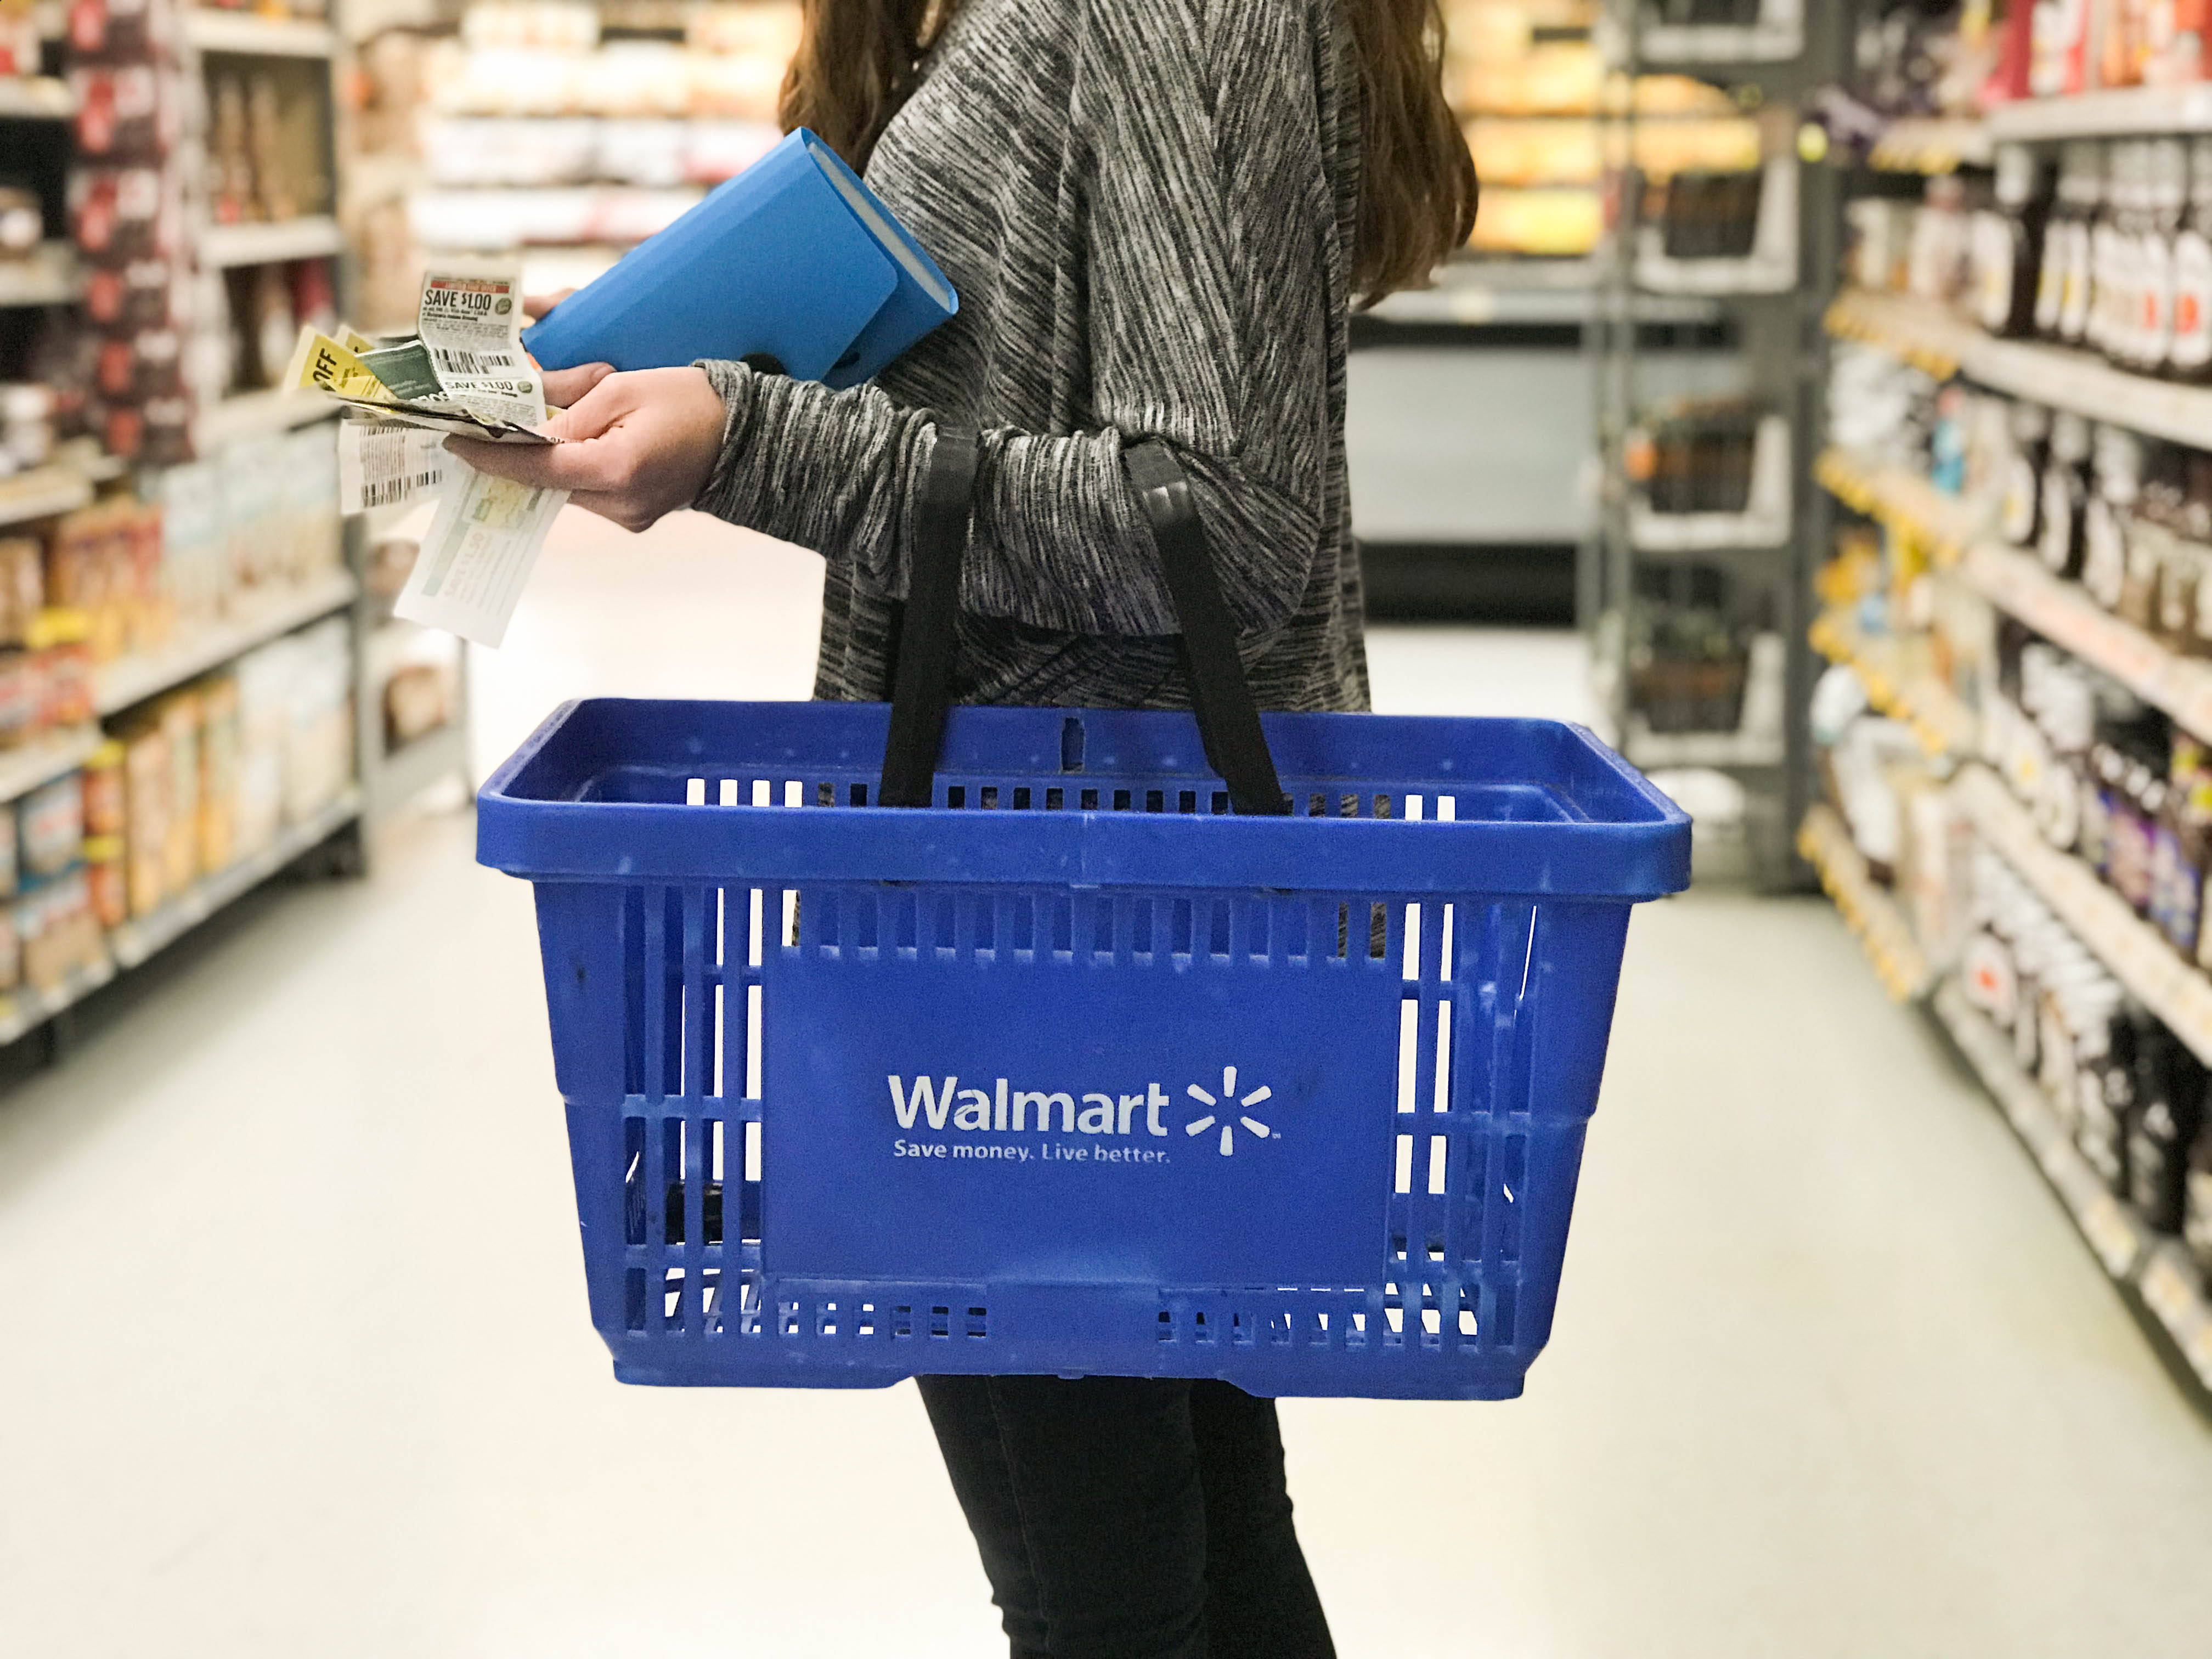 12 Walmart Couponing Hacks You Need To Know - The Krazy Coupon Lady - Free Printable Food Coupons For Walmart